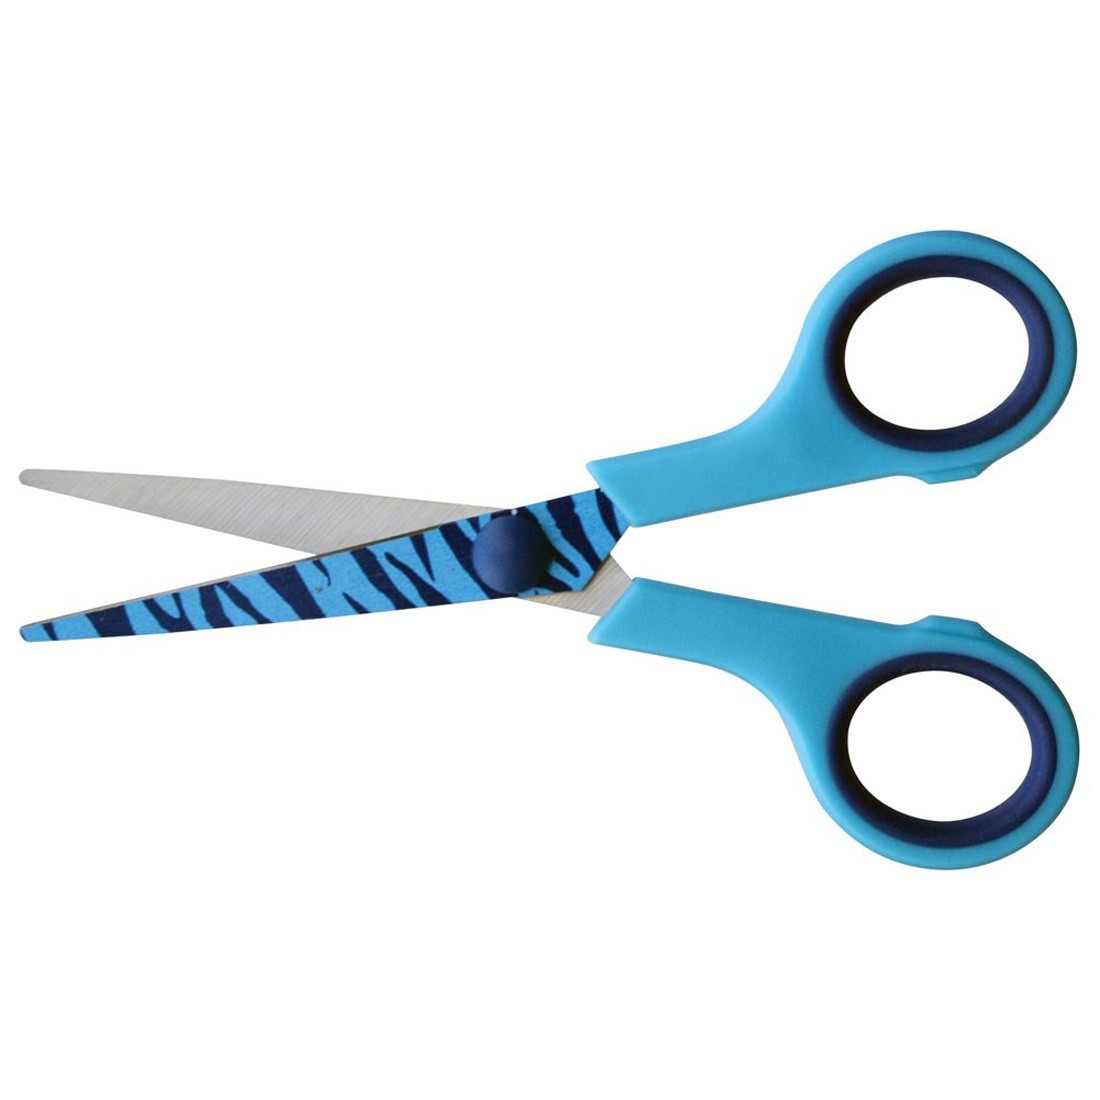 Maped Essential Kid Scissors, 5 Inches, Blunt Tip, Assorted Colors, Pack of  50